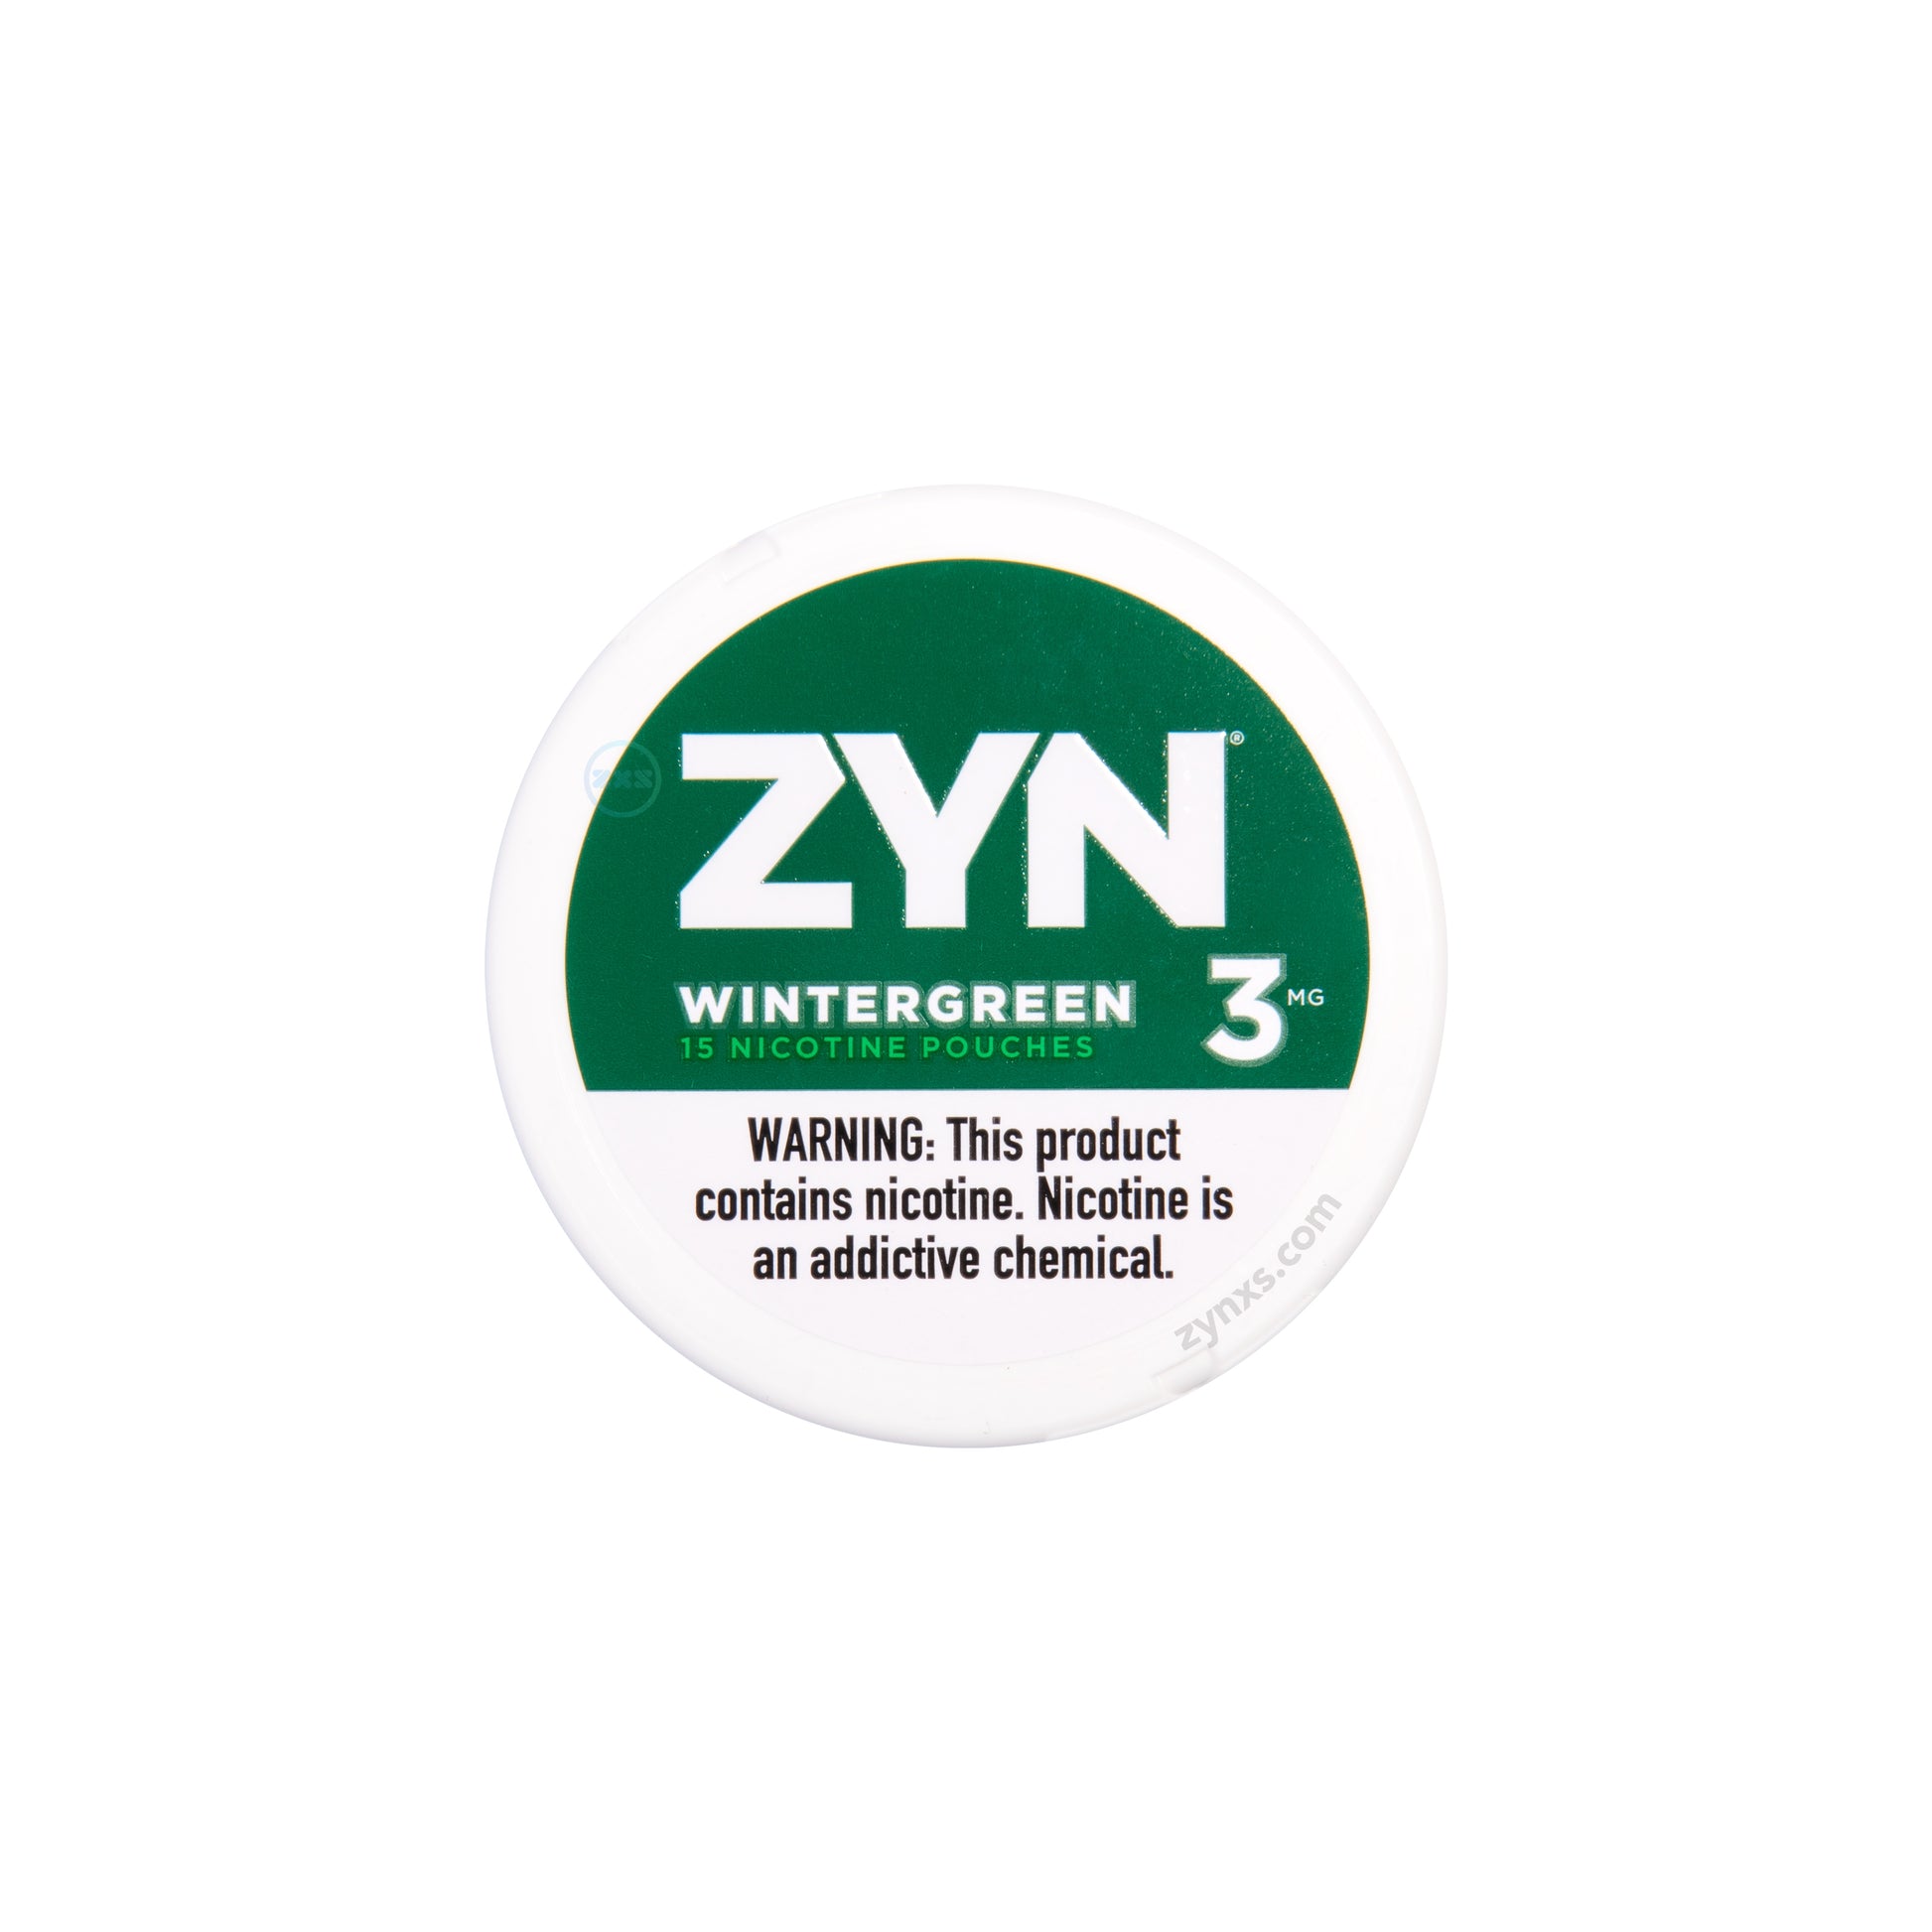 Zyn Wintergreen 3 MG nicotine pouches packaging. The packaging features a cool green and white color theme, suggestive of the wintergreen flavor.